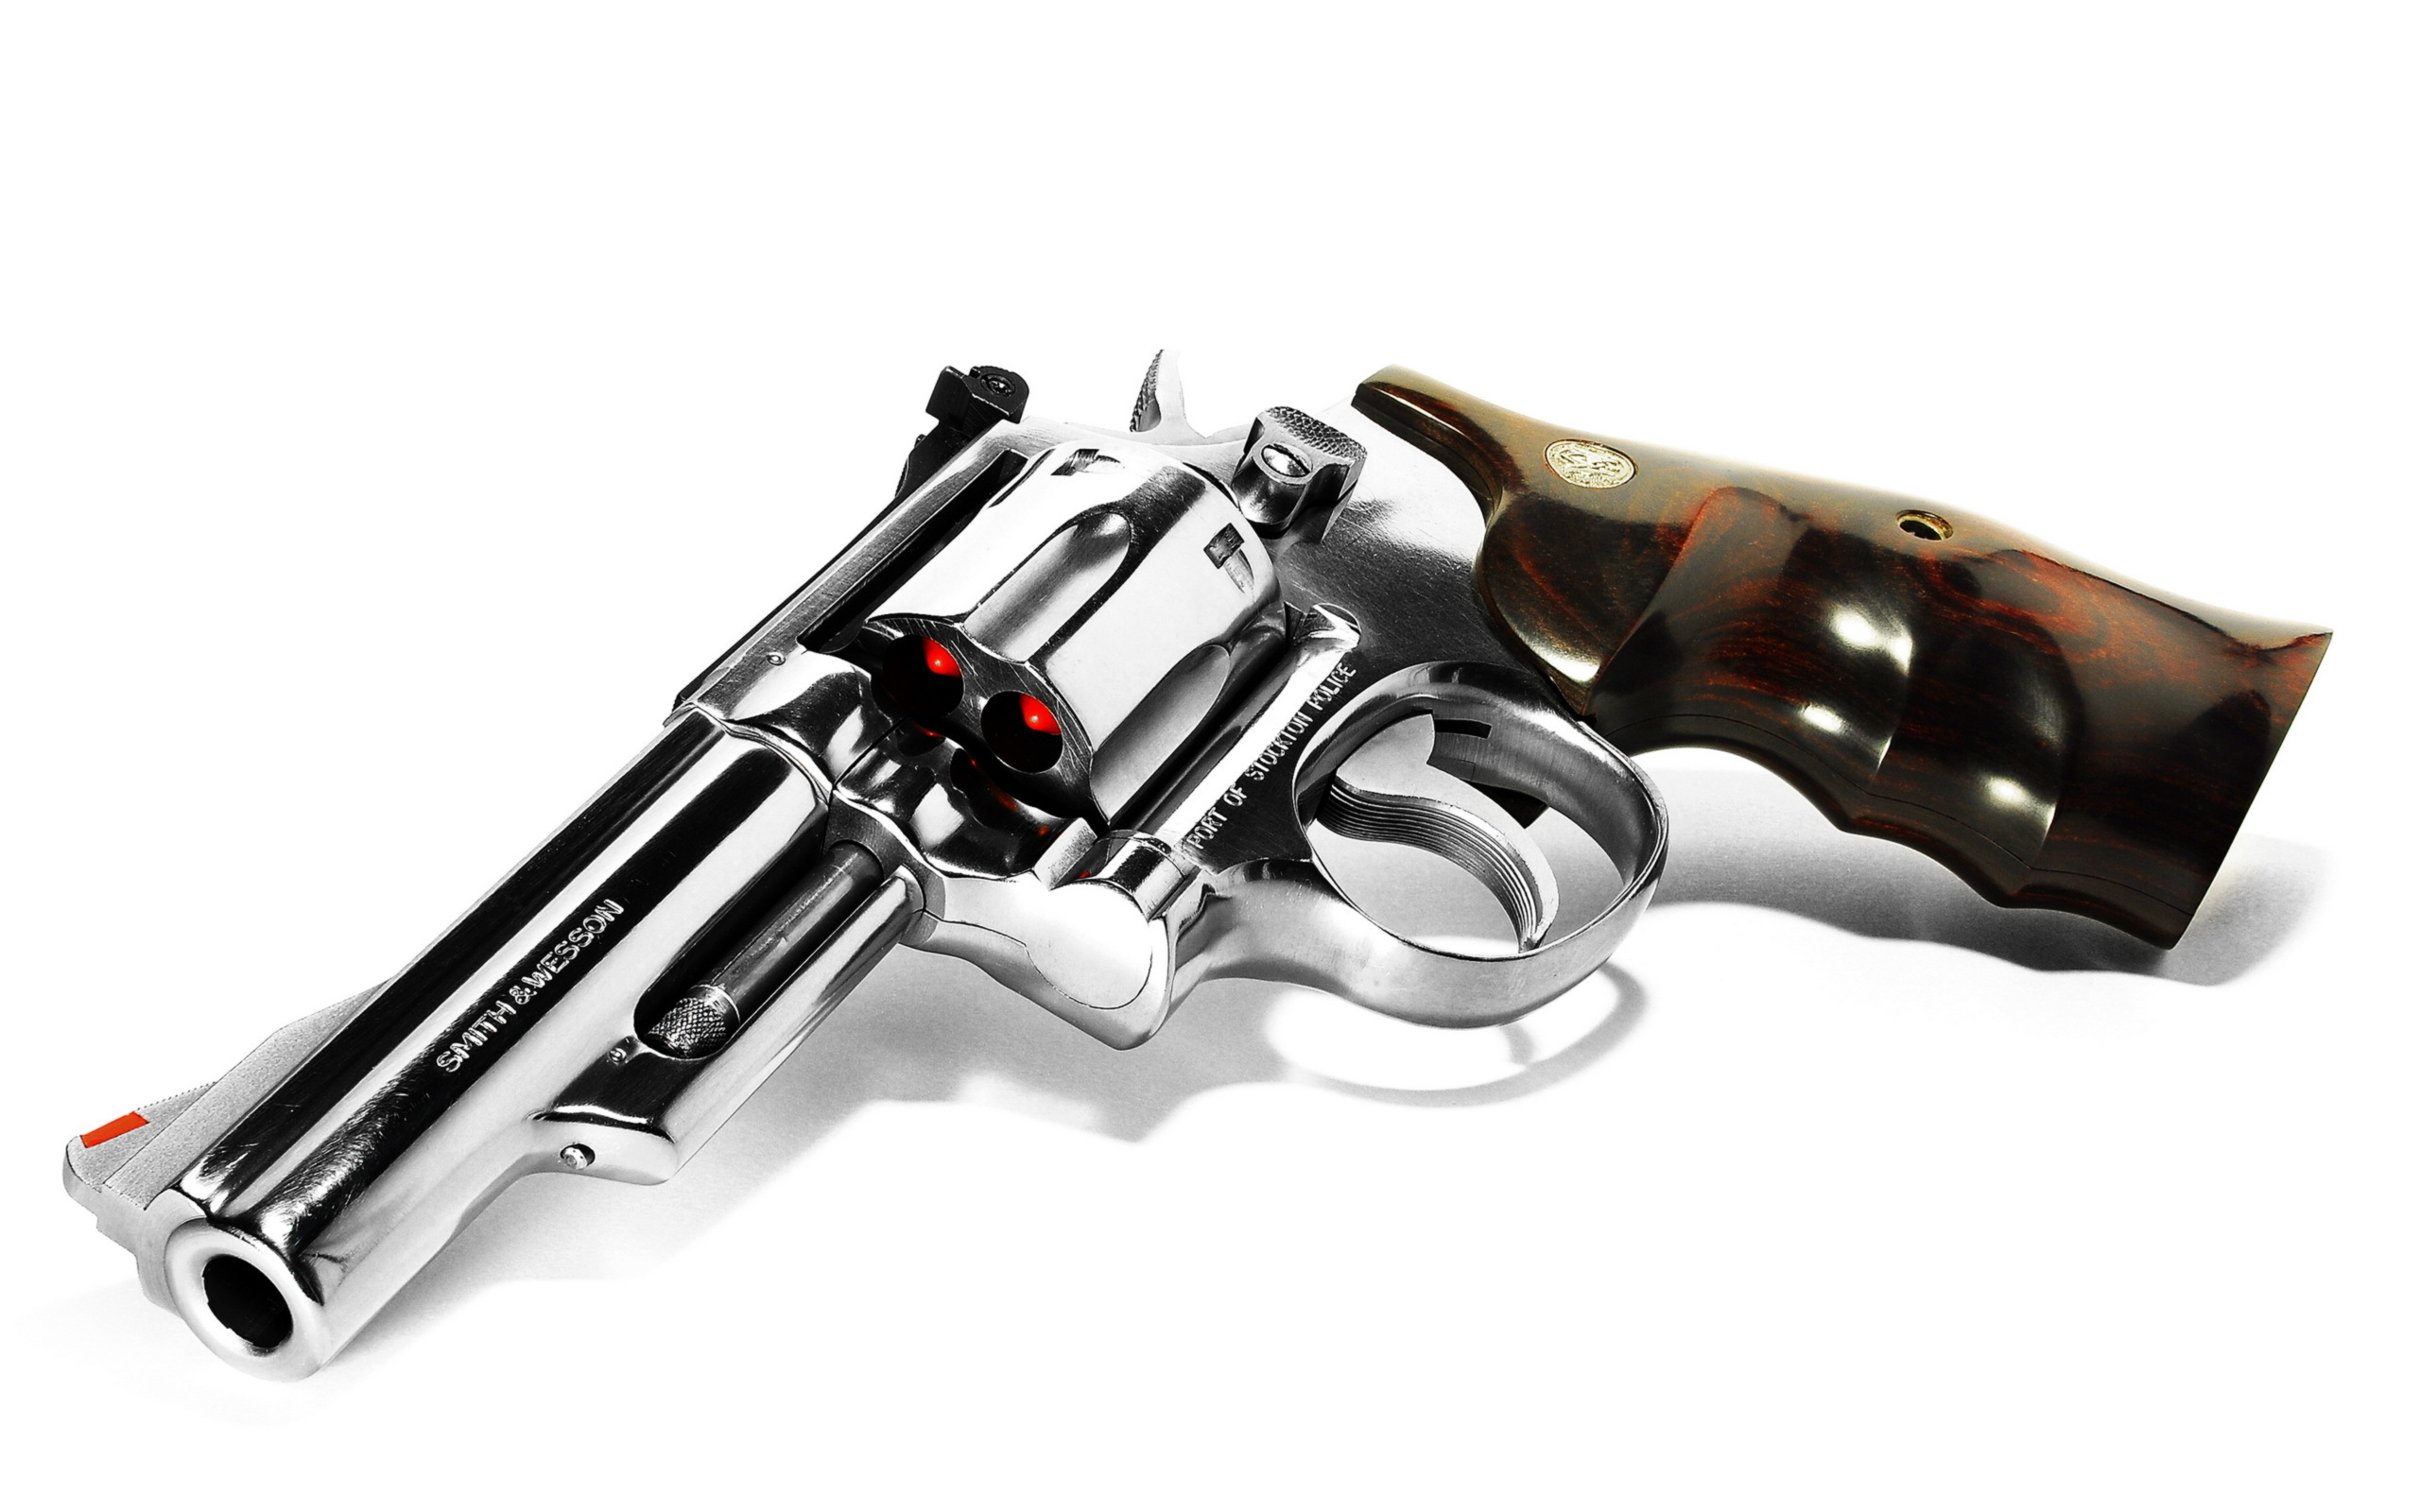 Smith and Wesson Model 66 Combat Magnum Computer Wallpapers Desktop 2560x1600